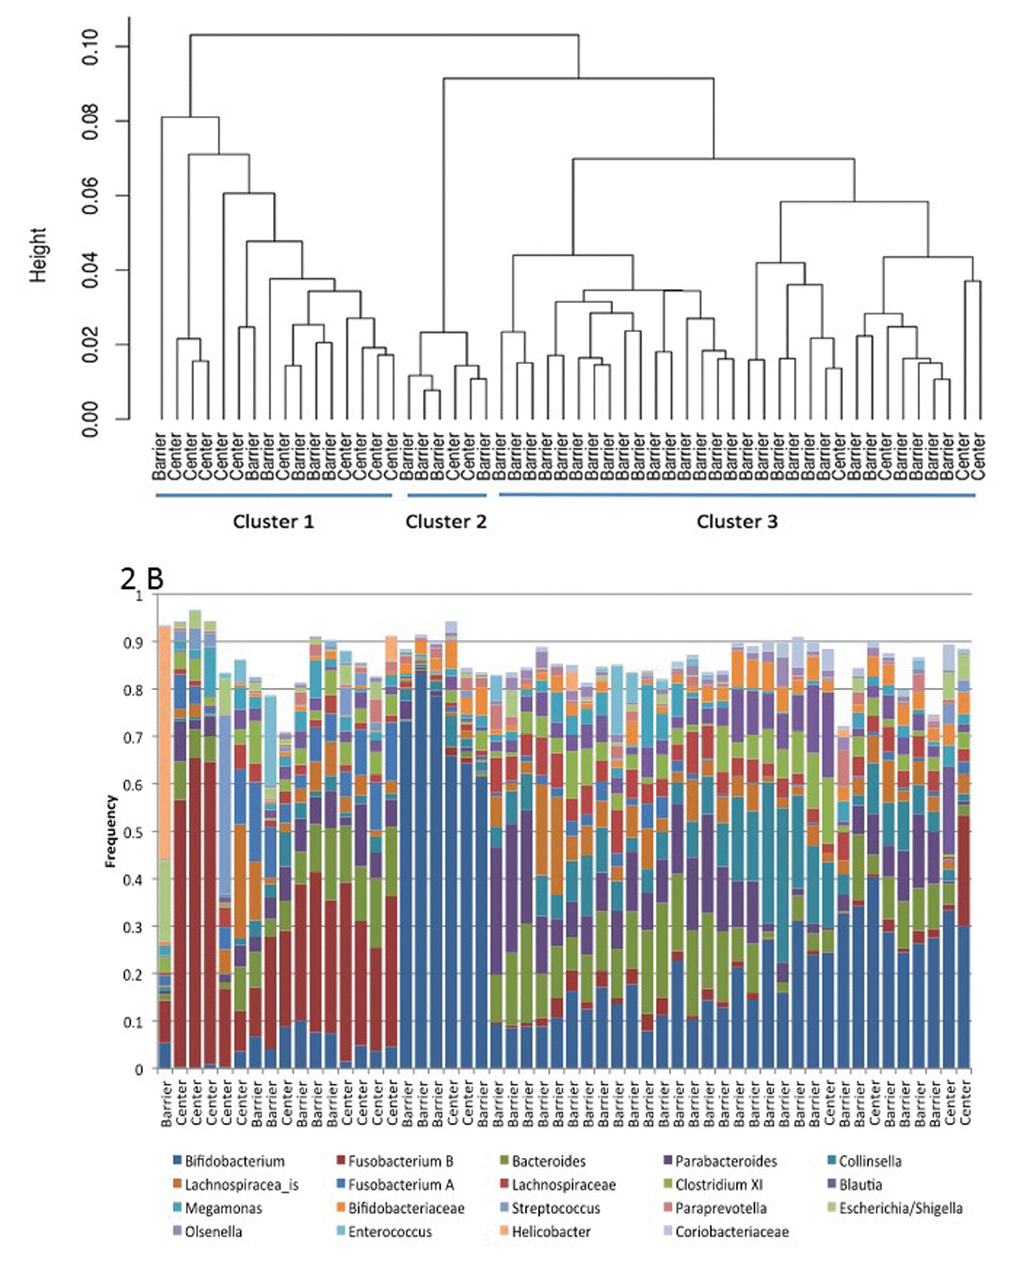 (A) Hierarchical clustering of marmoset gastrointestinal microbiomes from Barshop SPF barrier colony (Barrier) and the conventionally housed SNPRC colony (Center). (B) Frequency of taxa used in the cluster analysis, ordered by position in (A).